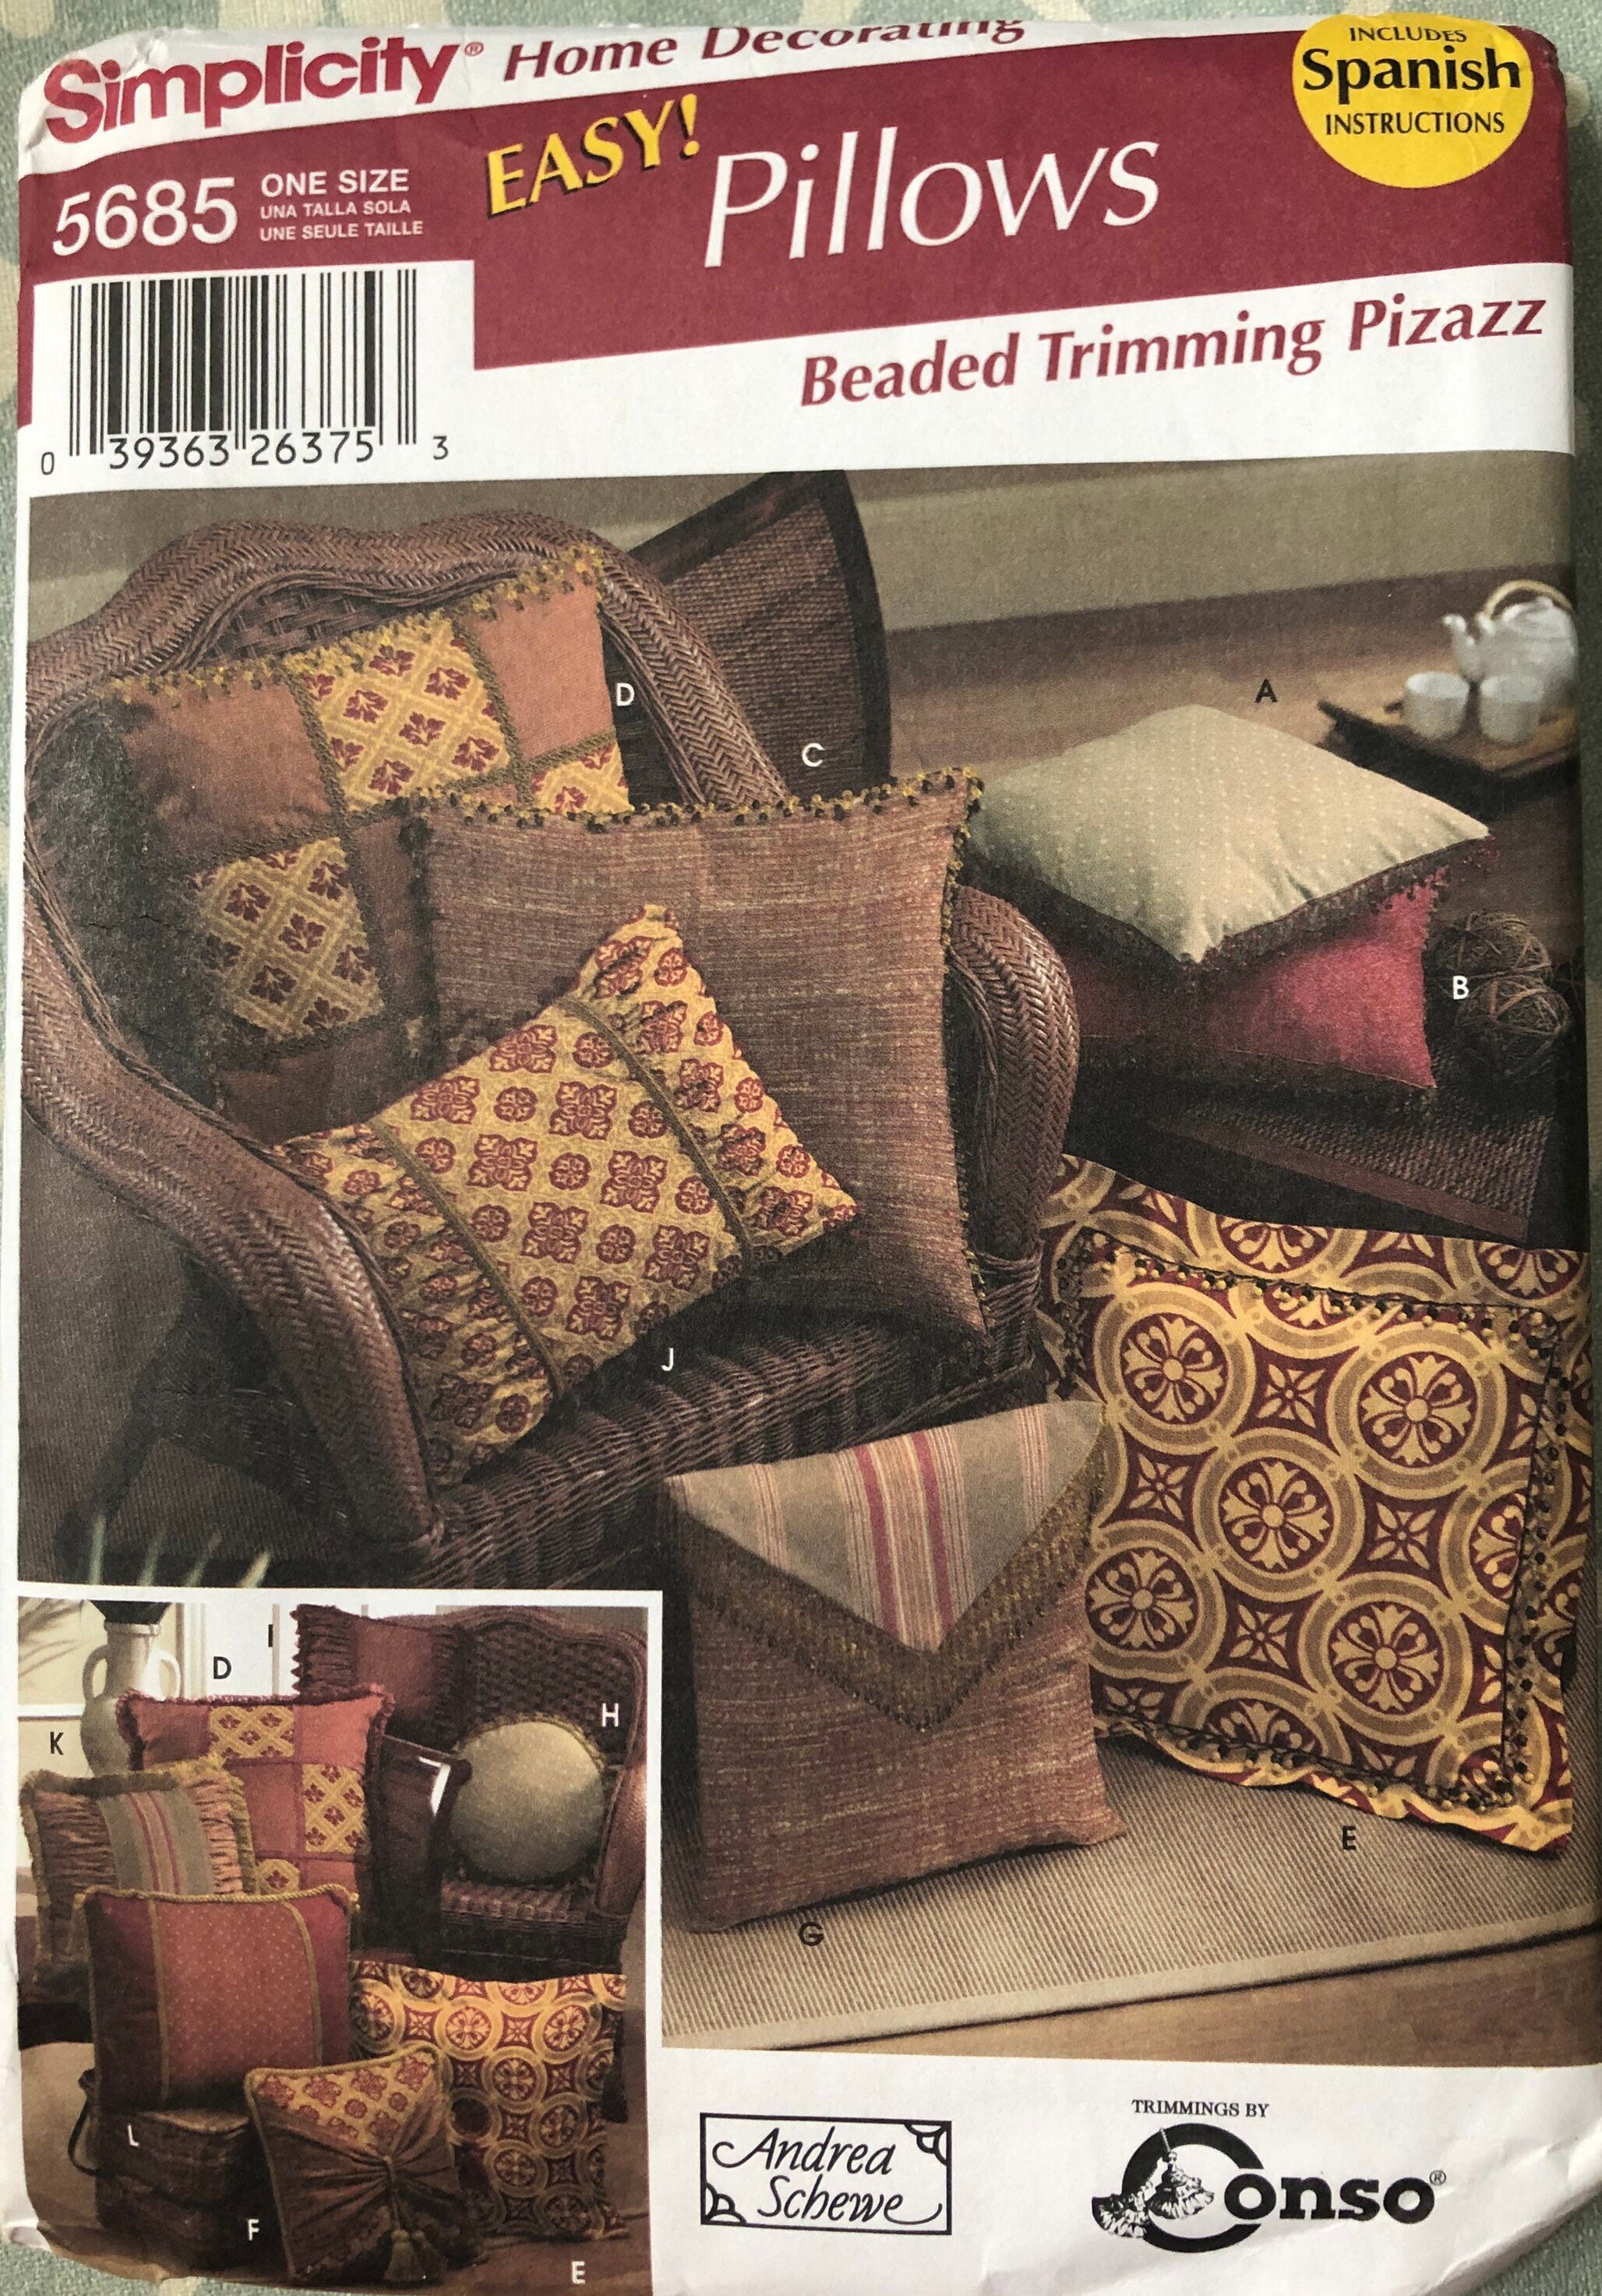 Pillows, Simplicity 1633, Sewing Pattern, Andrea Schewe, Square Pillows, Bed  Pillows, Couch Pillows, 4 Sizes Decorative Fabric Pillows 